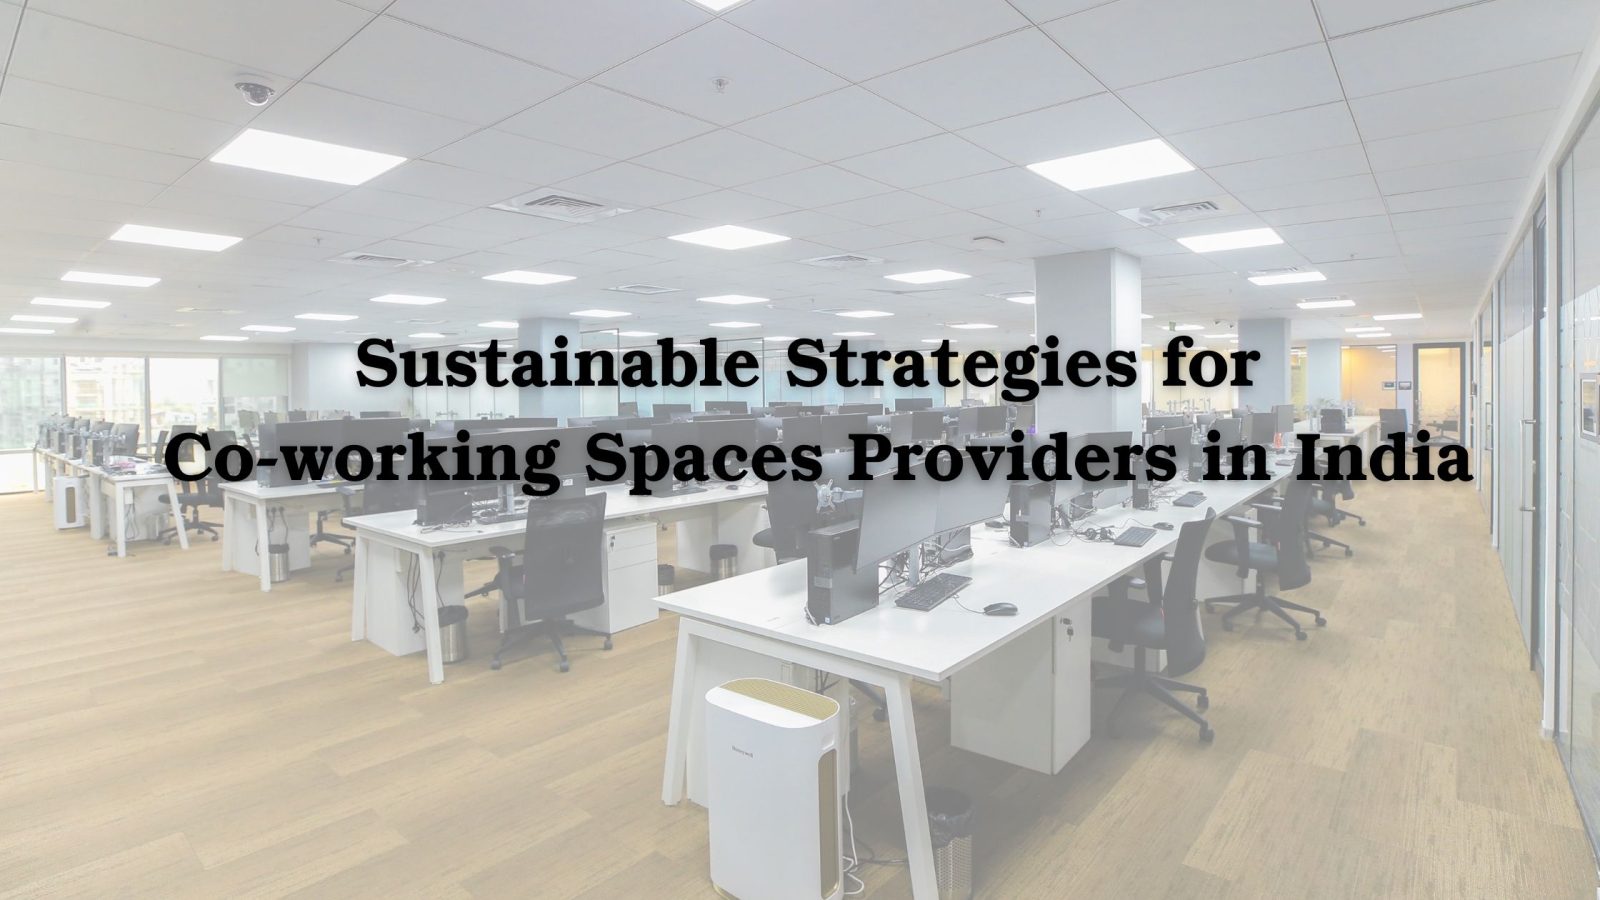 Co-working Spaces Providers in India